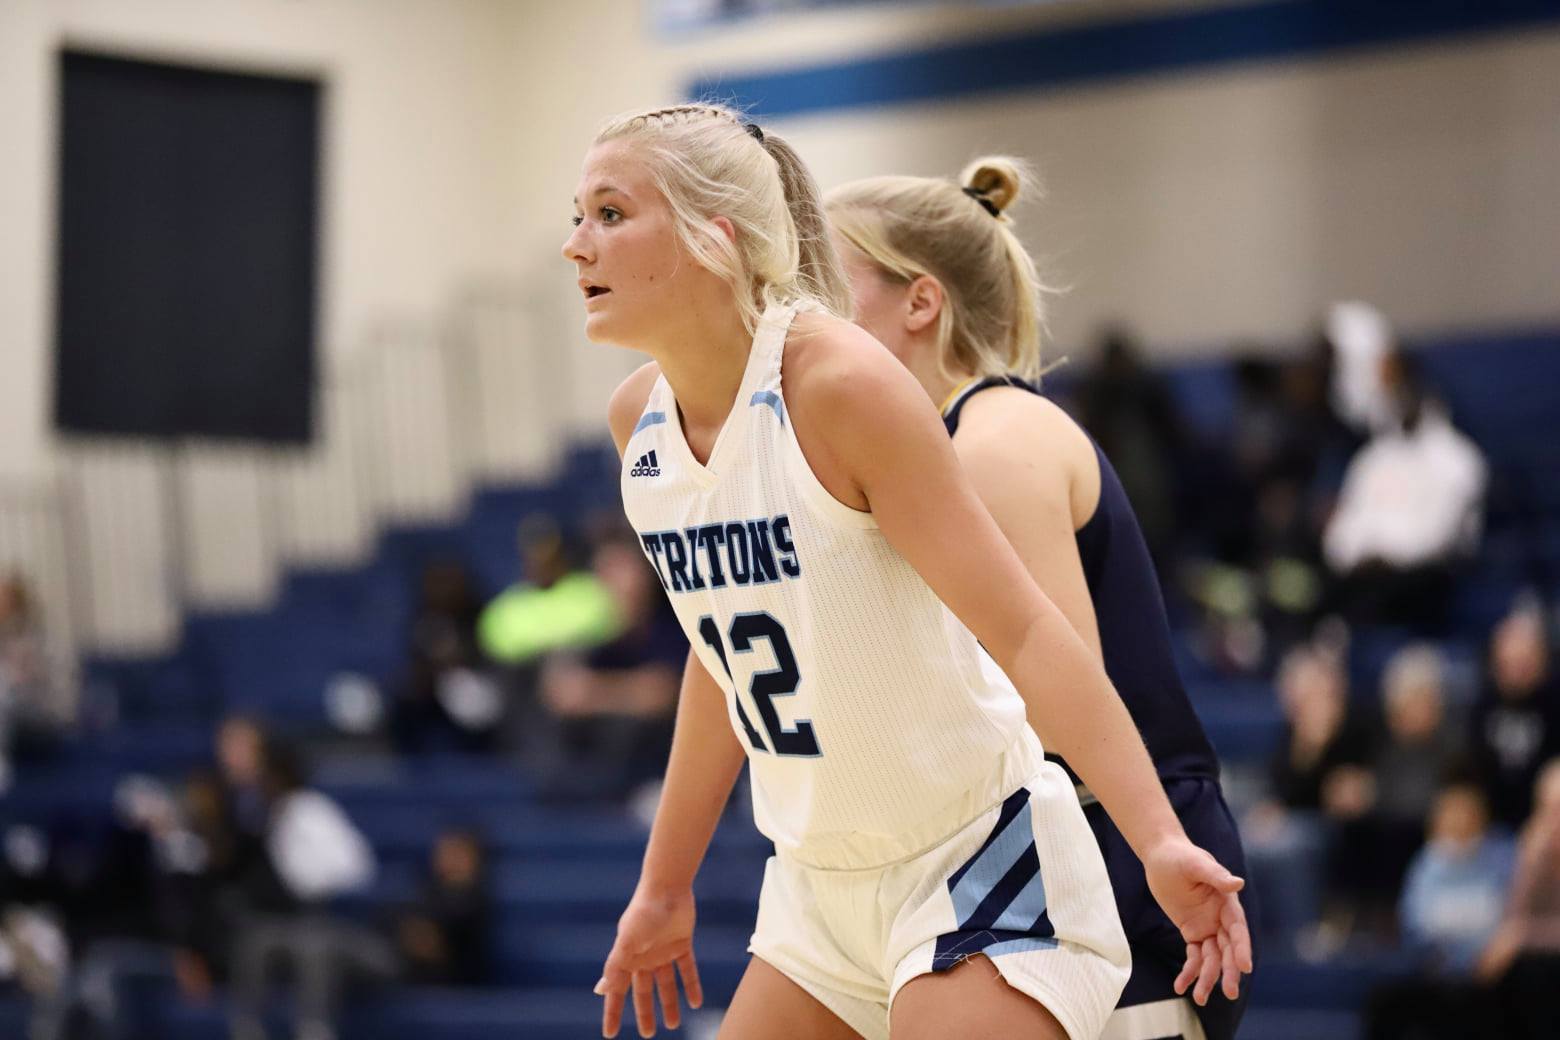 Iowa Central cruises to another victory